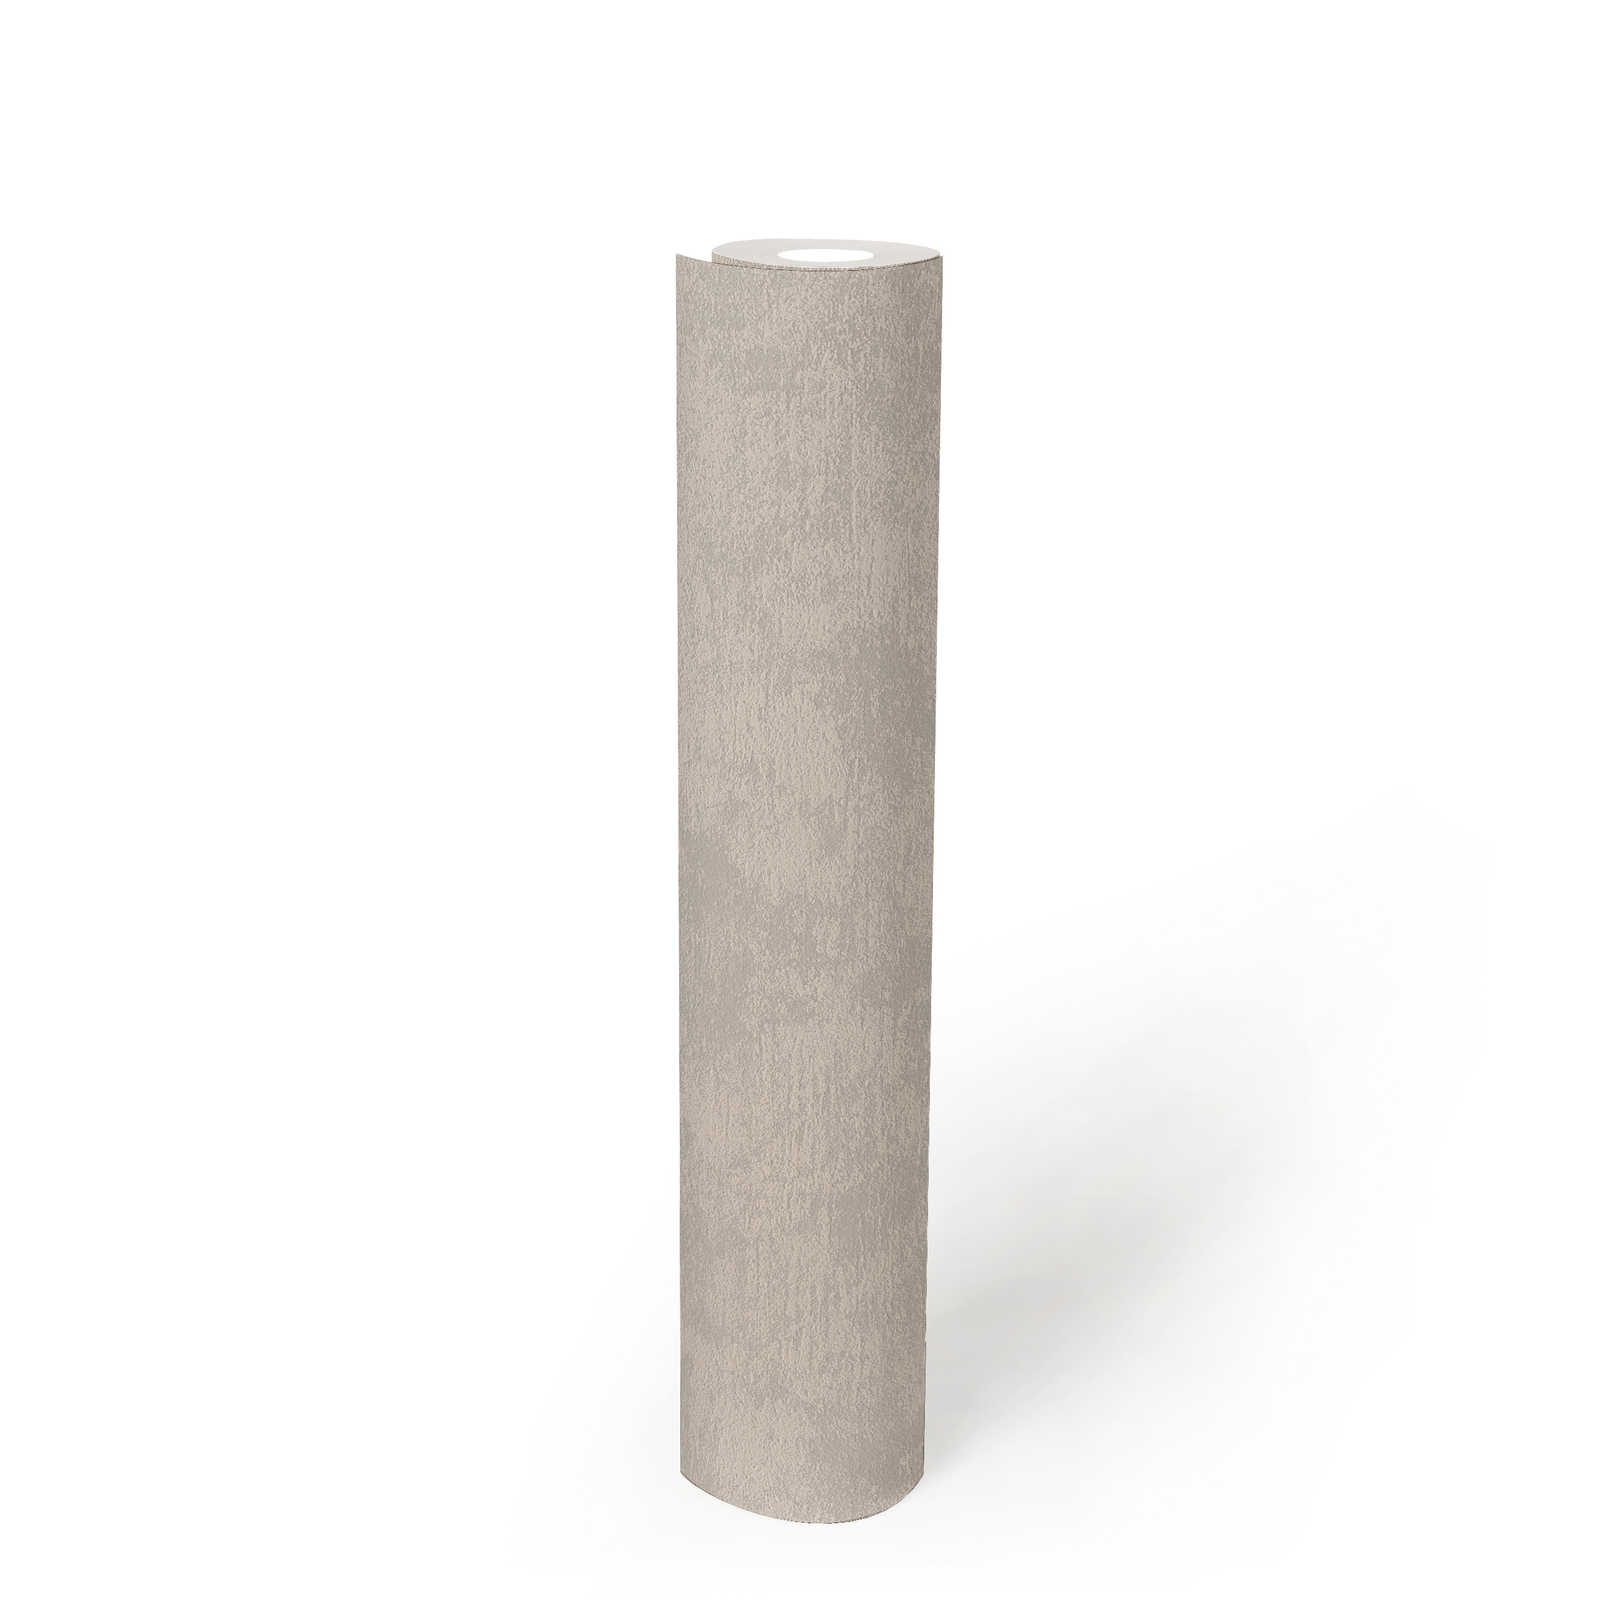             Plaster look non-woven wallpaper with textured pattern - beige
        